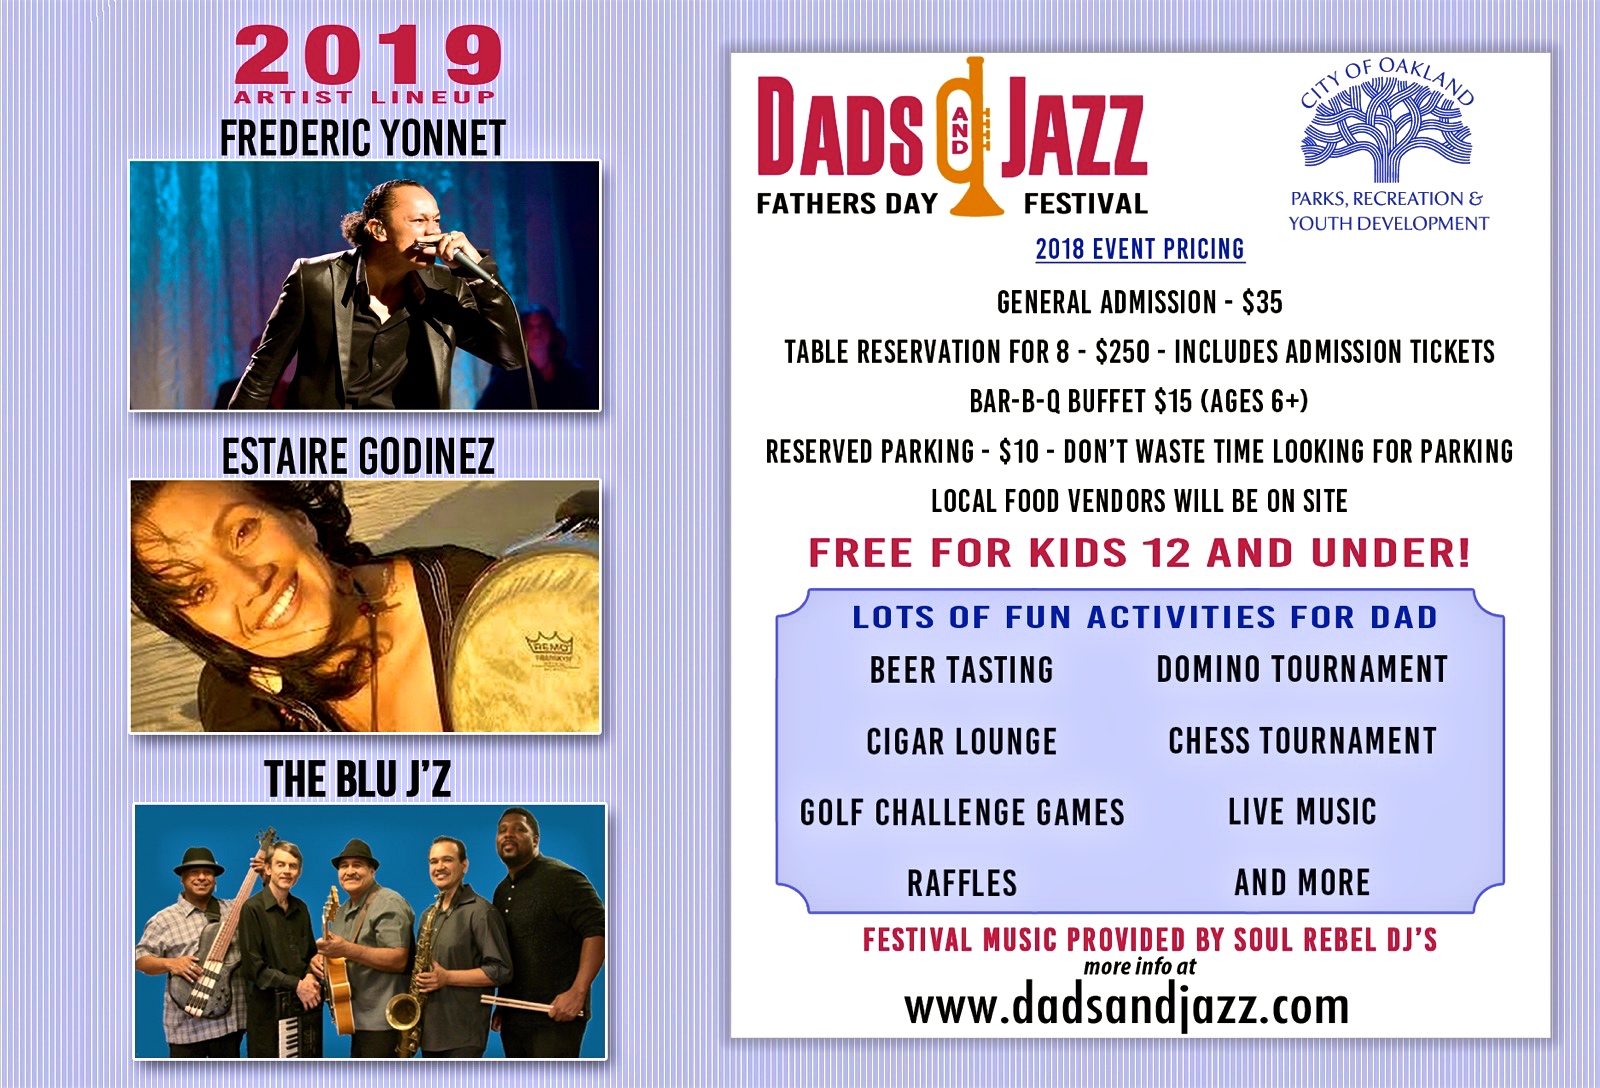 Rolando Morales will join Estaire Godinez for the Dads and Jazz Concert at Dunsmuir House 